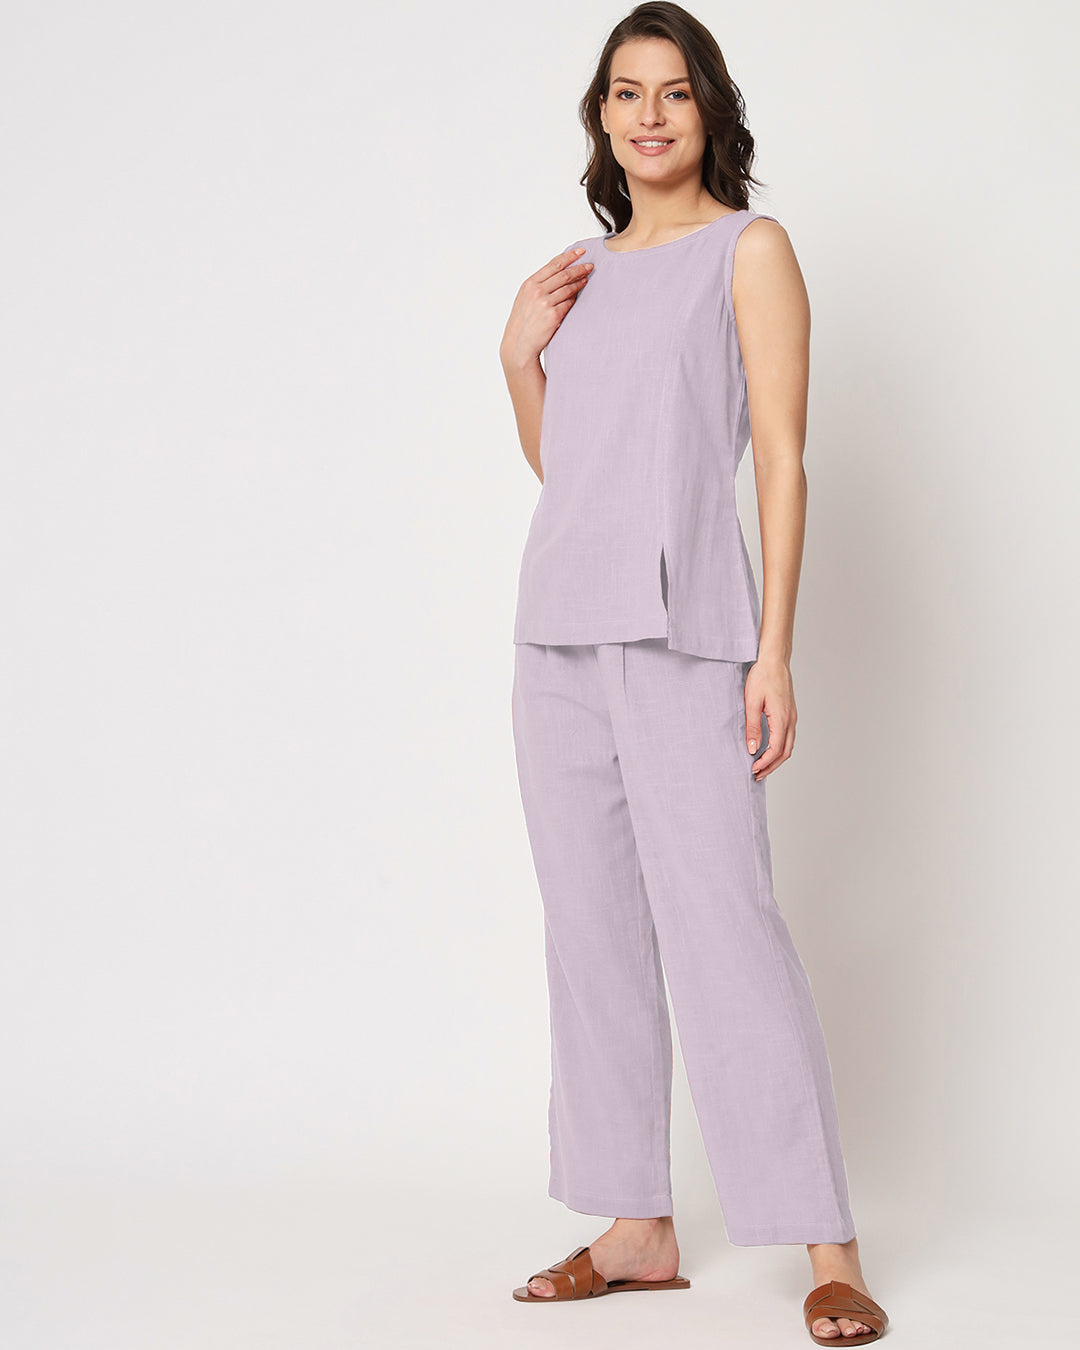 Lilac Sleeveless Short Length Solid Top (Without Bottoms)